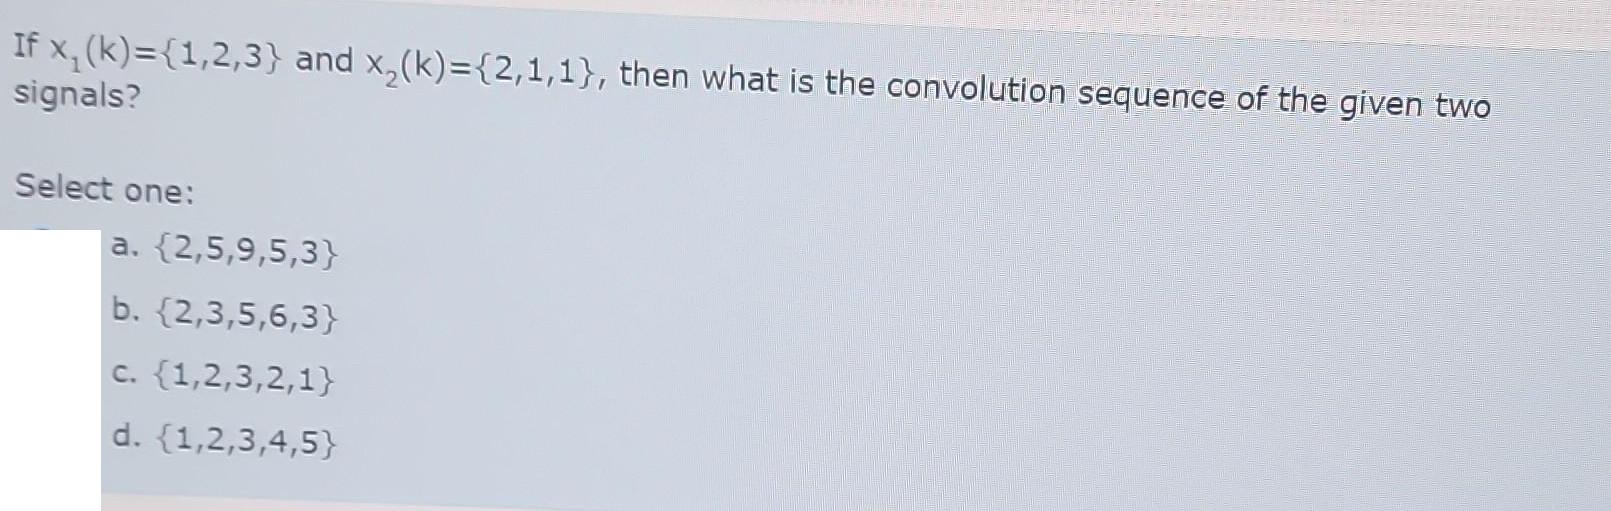 If x(k)={1,2,3} and x(k)= {2,1,1}, then what is the convolution sequence of the given two signals? Select